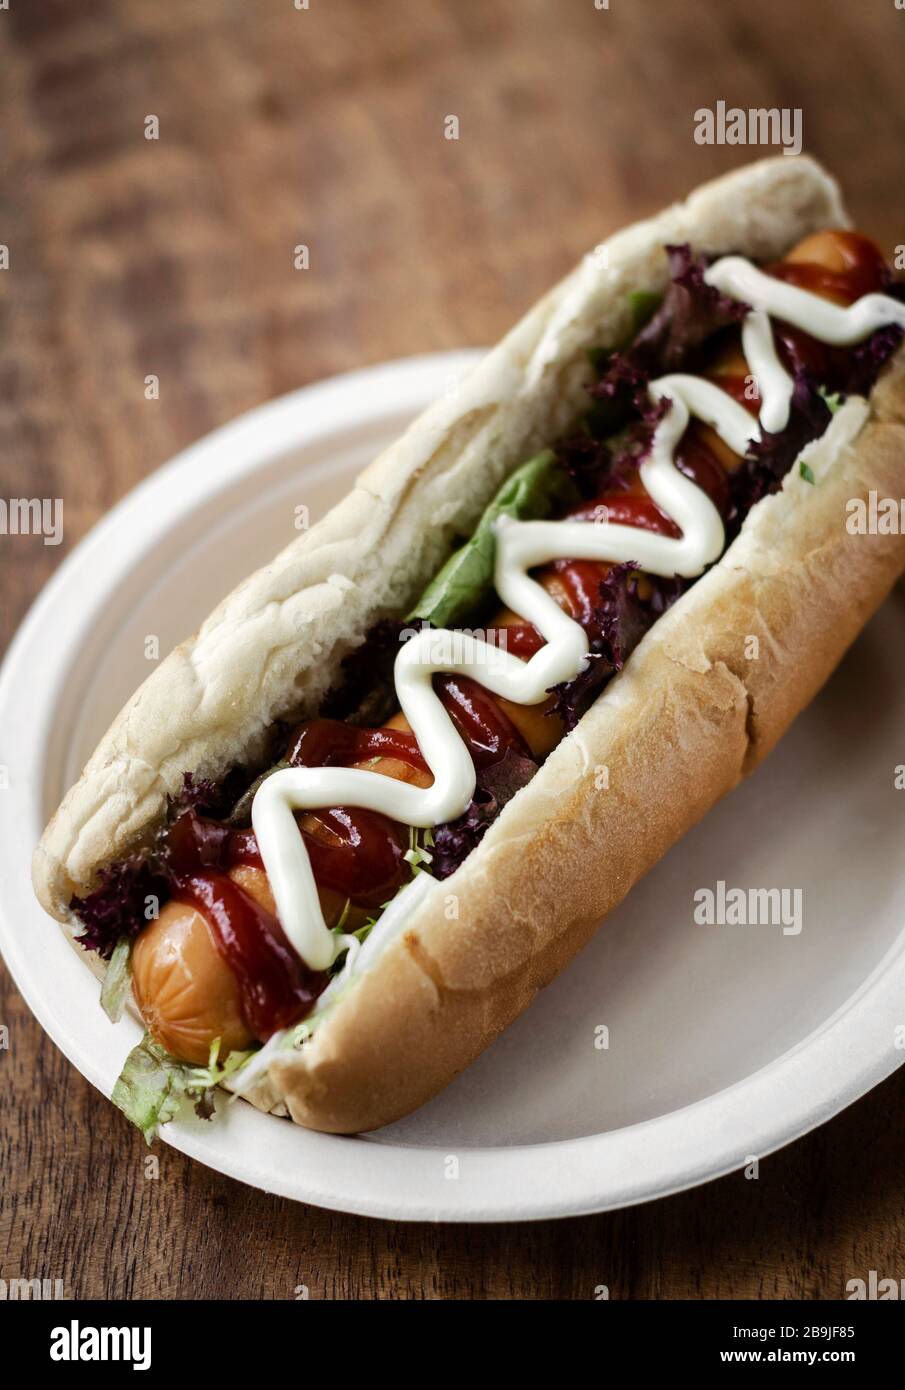 classic hot dog with frankfurter sausage and sauces on wood table Stock Photo